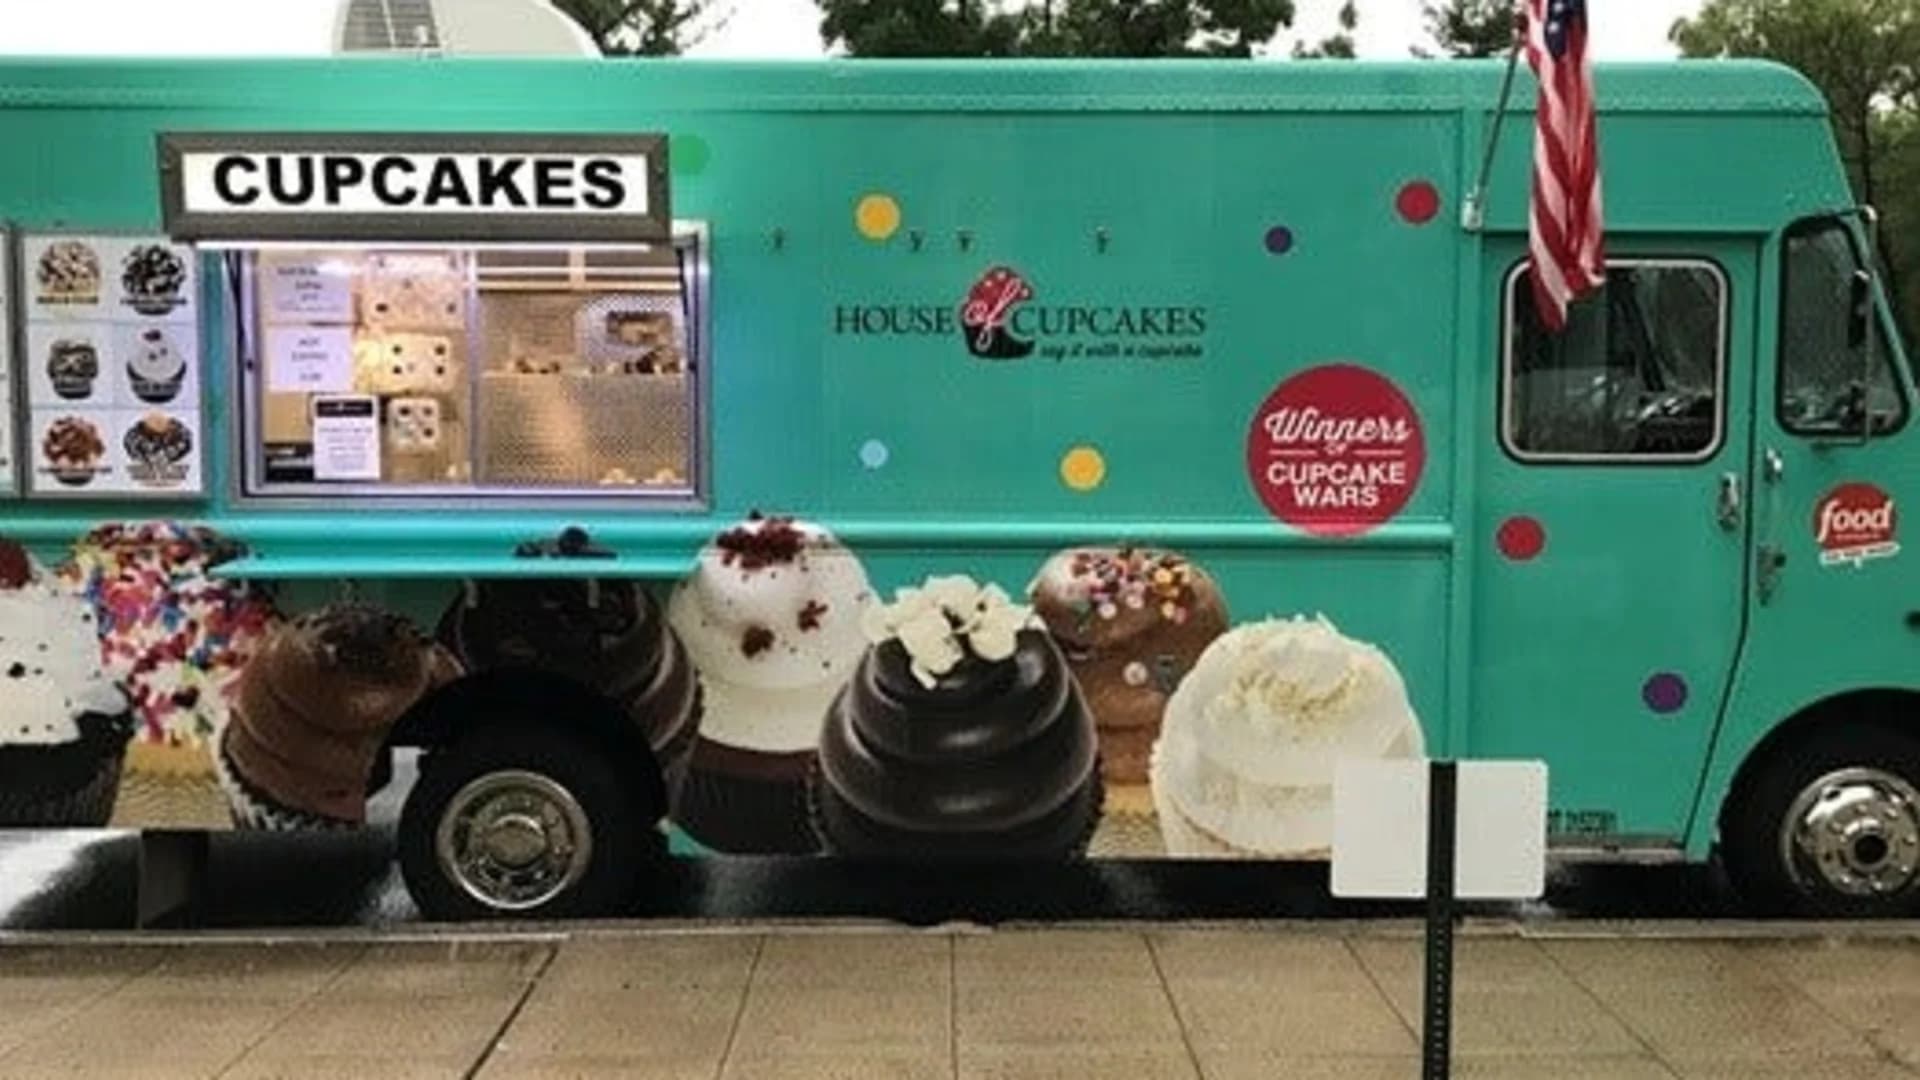 Food Truck Friday: House of Cupcakes